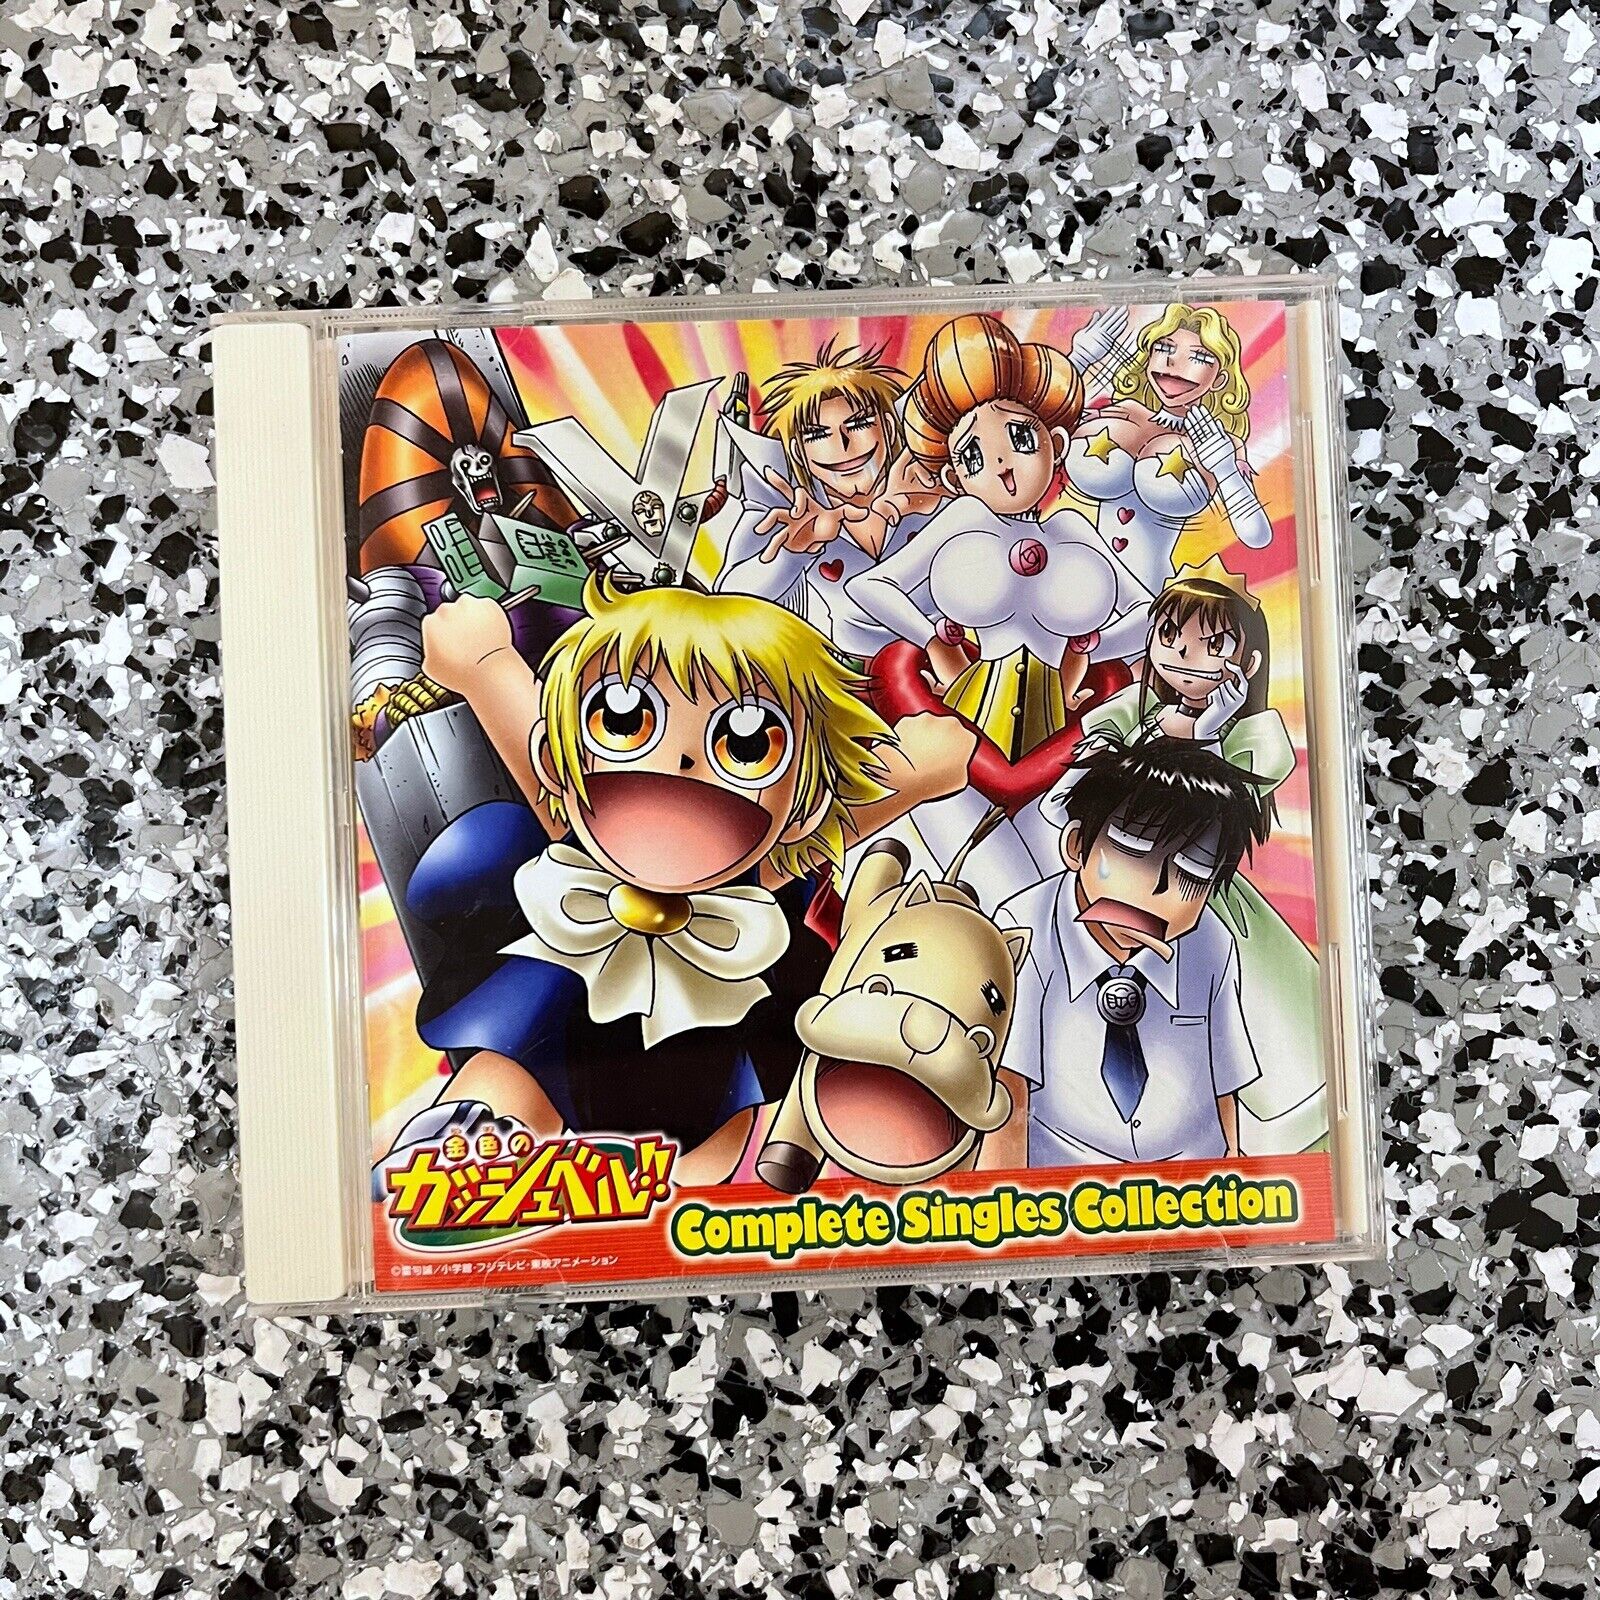 Zatch Bell Complete Singles Collection CD